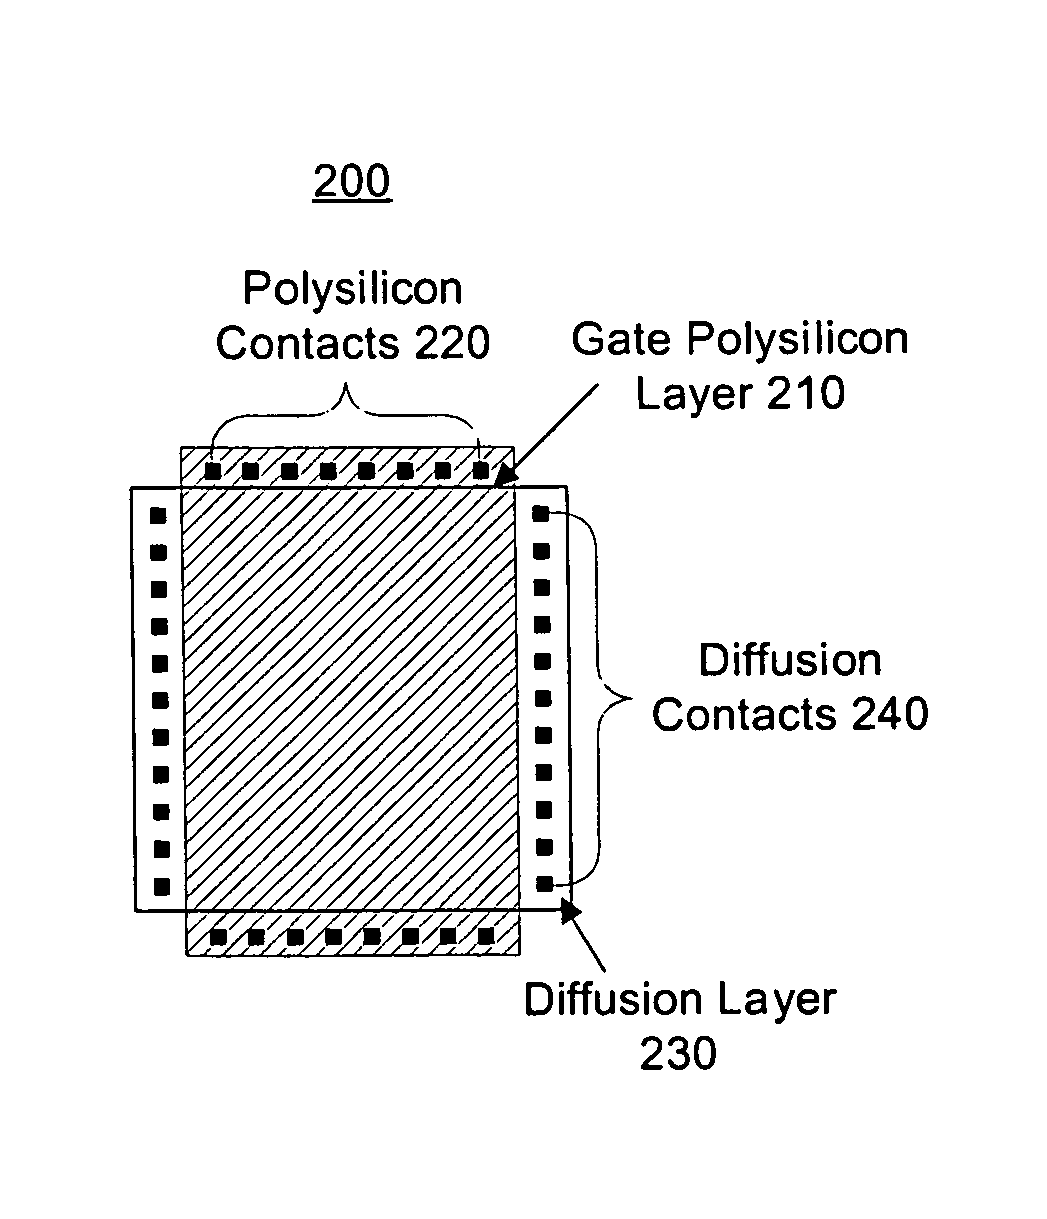 Apparatus and methods for providing highly effective and area efficient decoupling capacitance in programmable logic devices